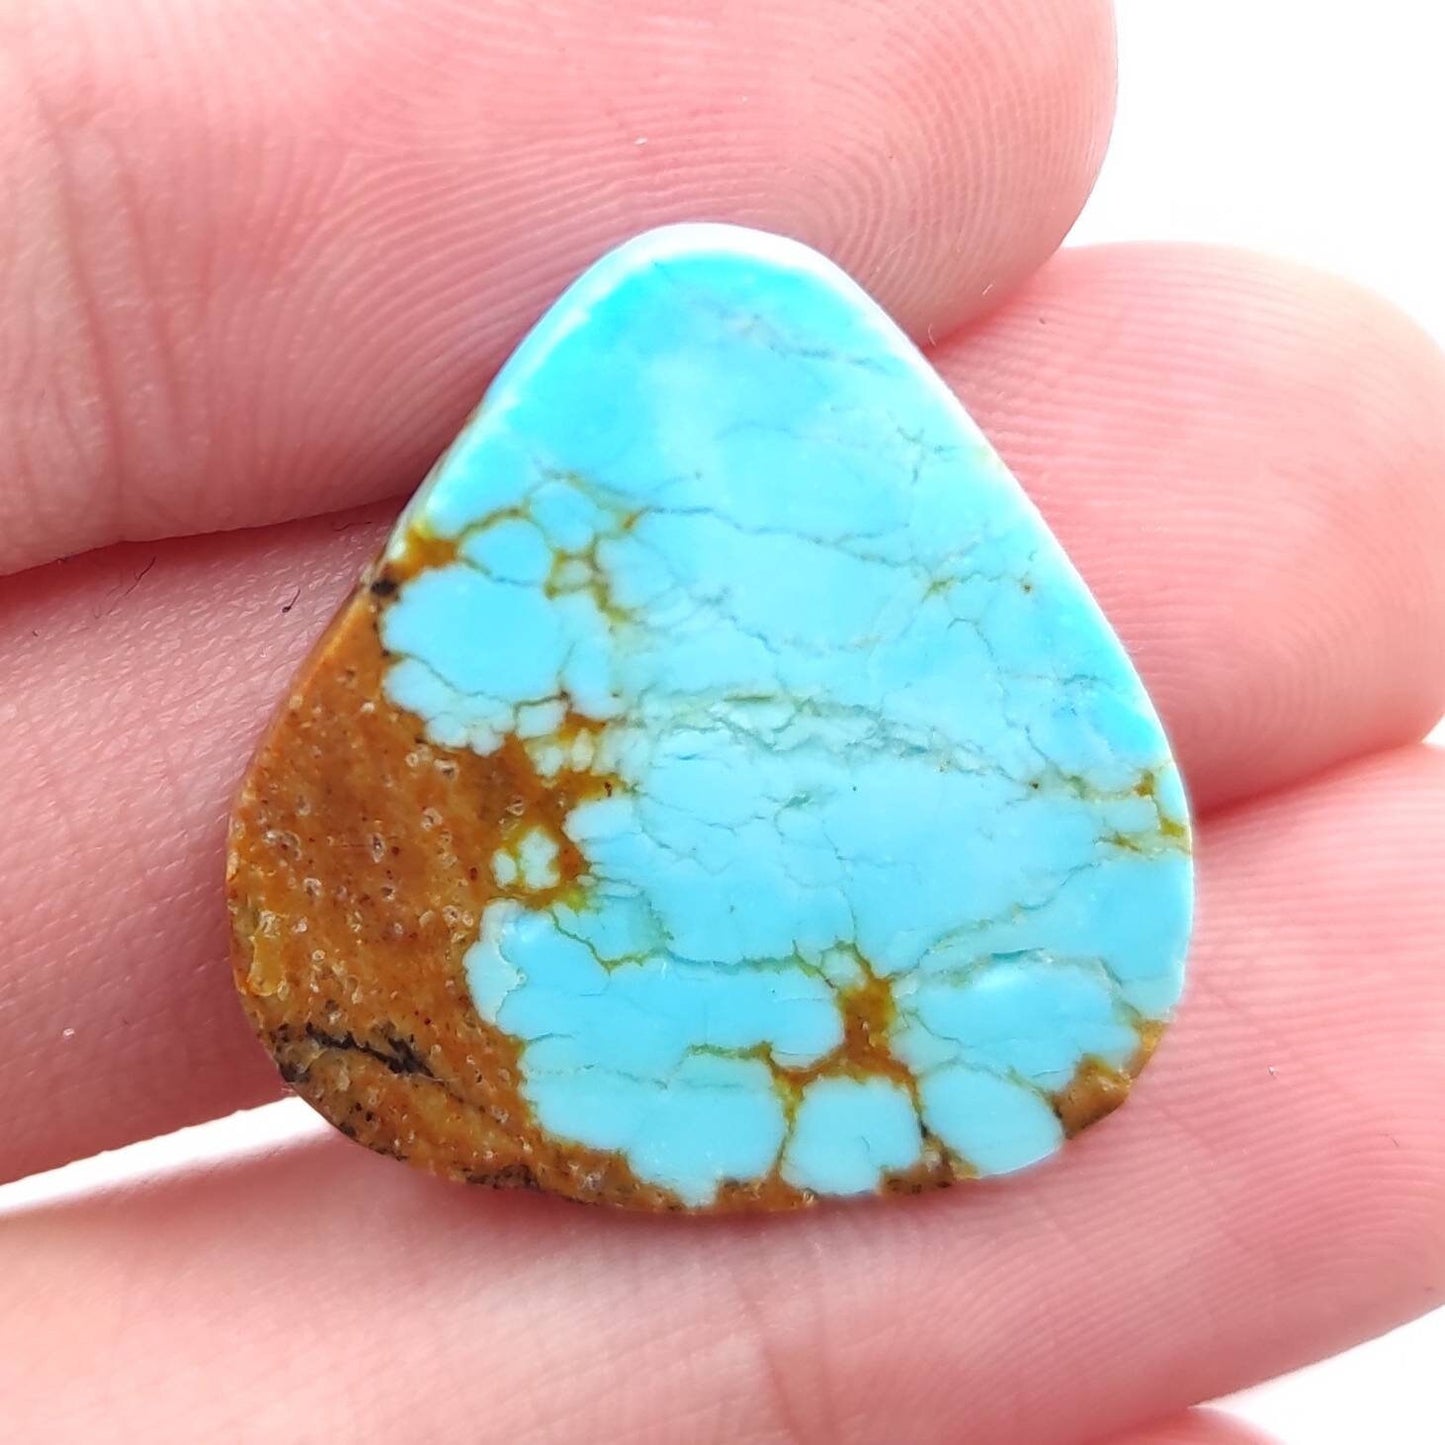 13ct Genuine Turquoise from Kingman Mine in Arizona - Real Blue Turquoise - Stabilized Turquoise Cabochon - No Dye - Natural Turquoise Gem